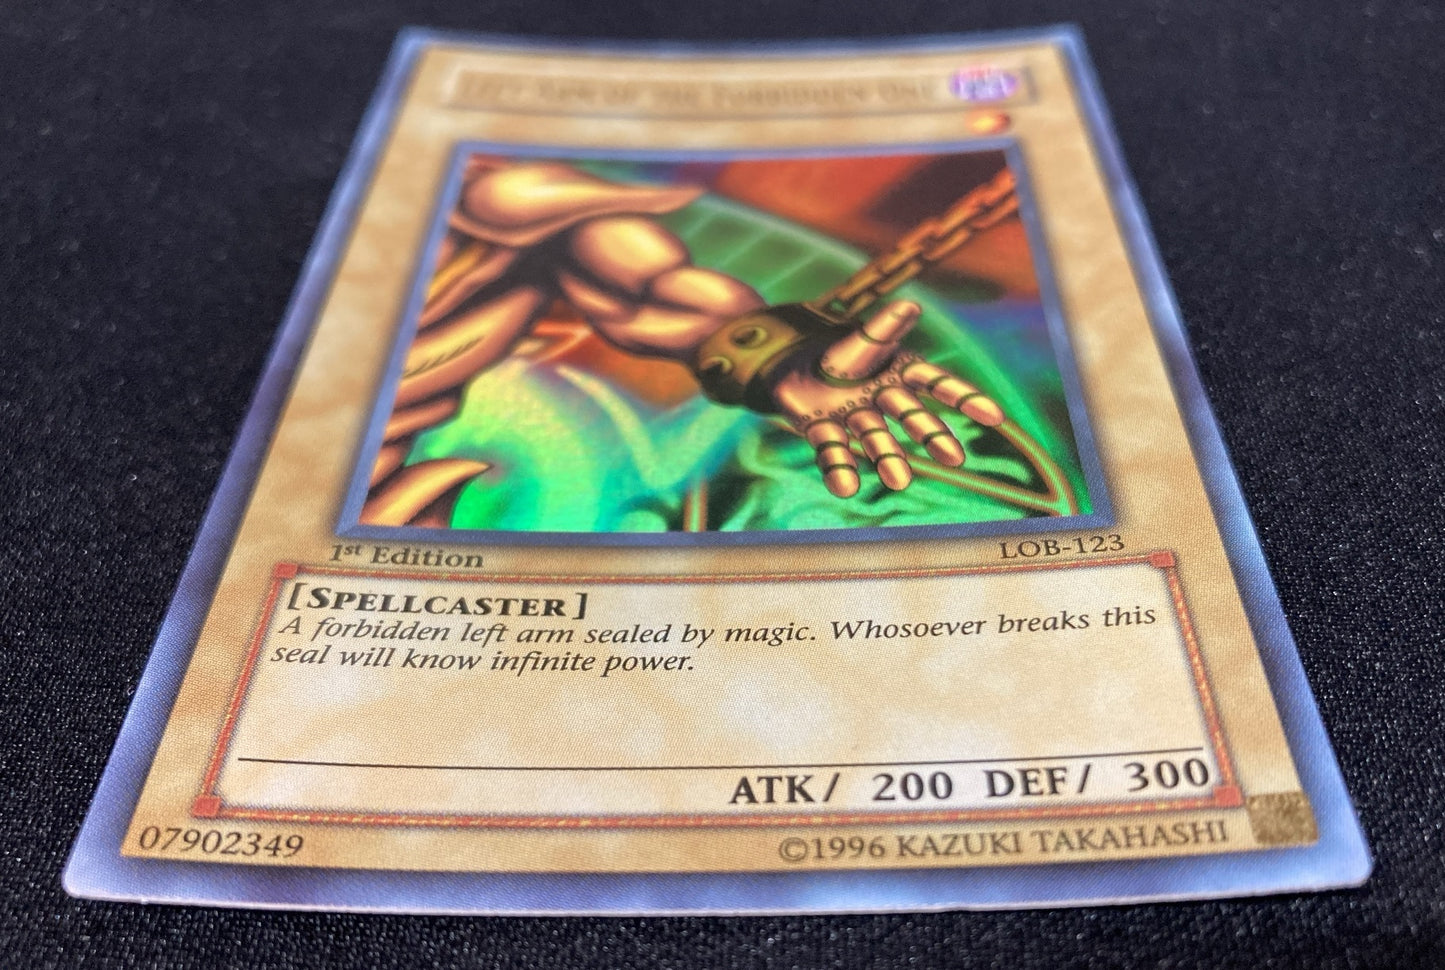 Left Arm of the Forbidden One (LOB-123) 1st